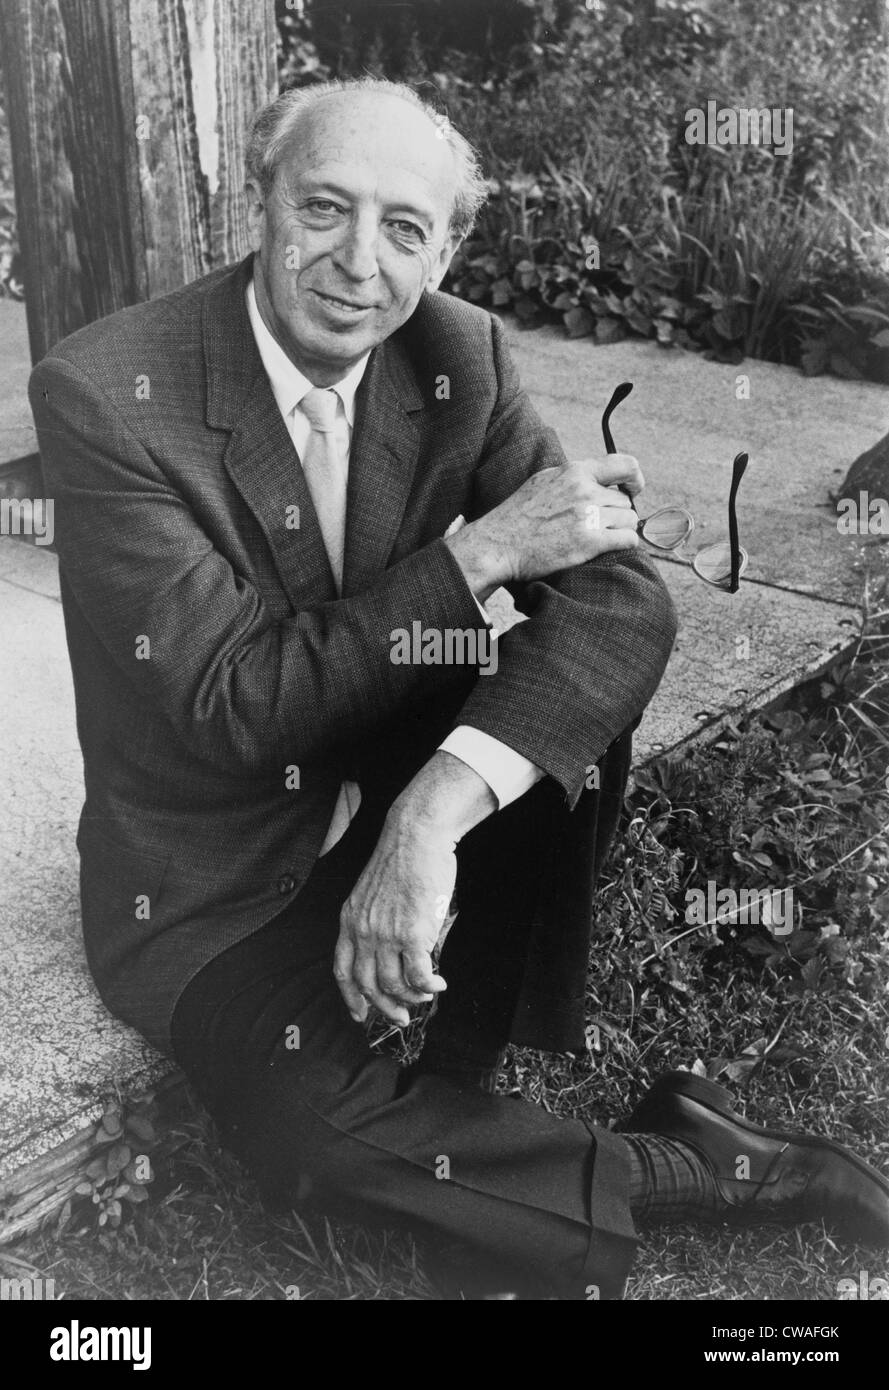 Aaron Copland (1900-1990), American composer, seated outdoors at the MacDowell Colony, a prestigous artists' colony in New Stock Photo